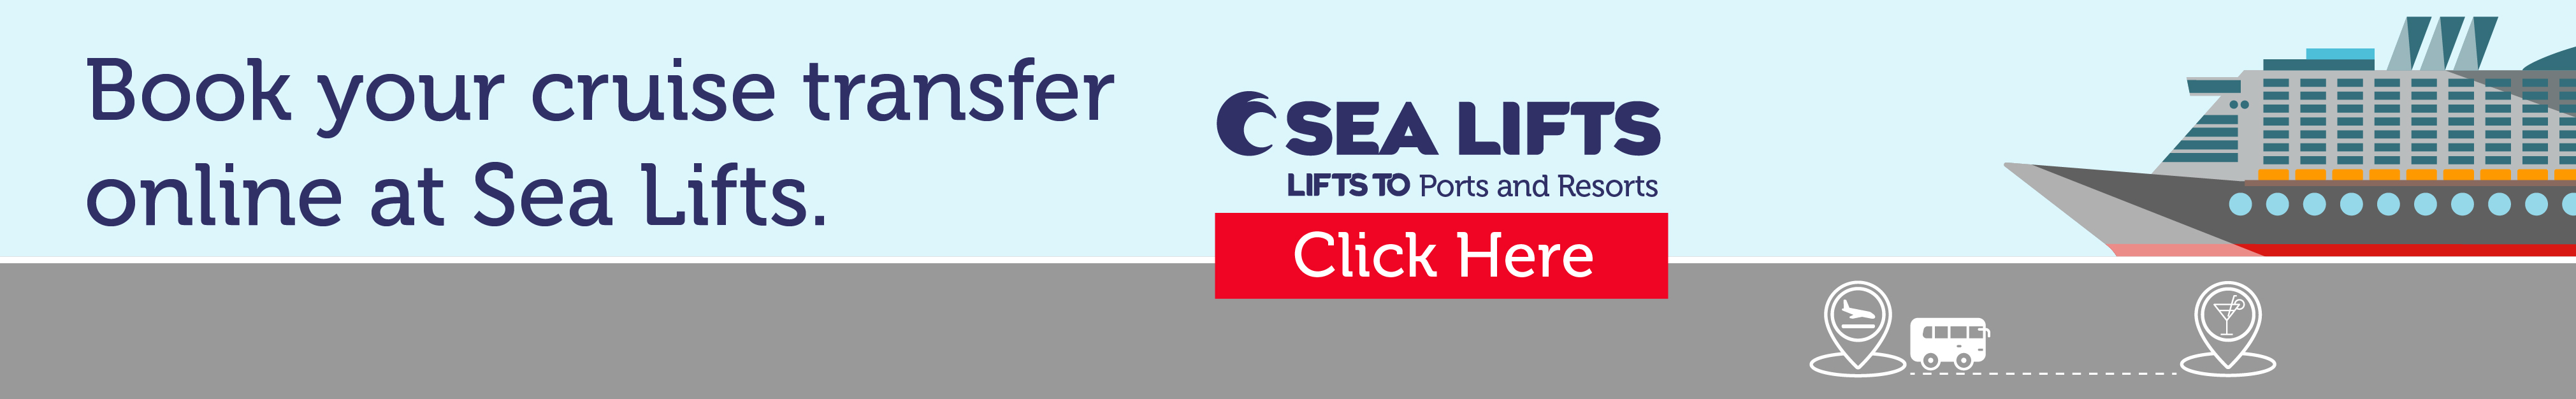 Sea Lifts banner